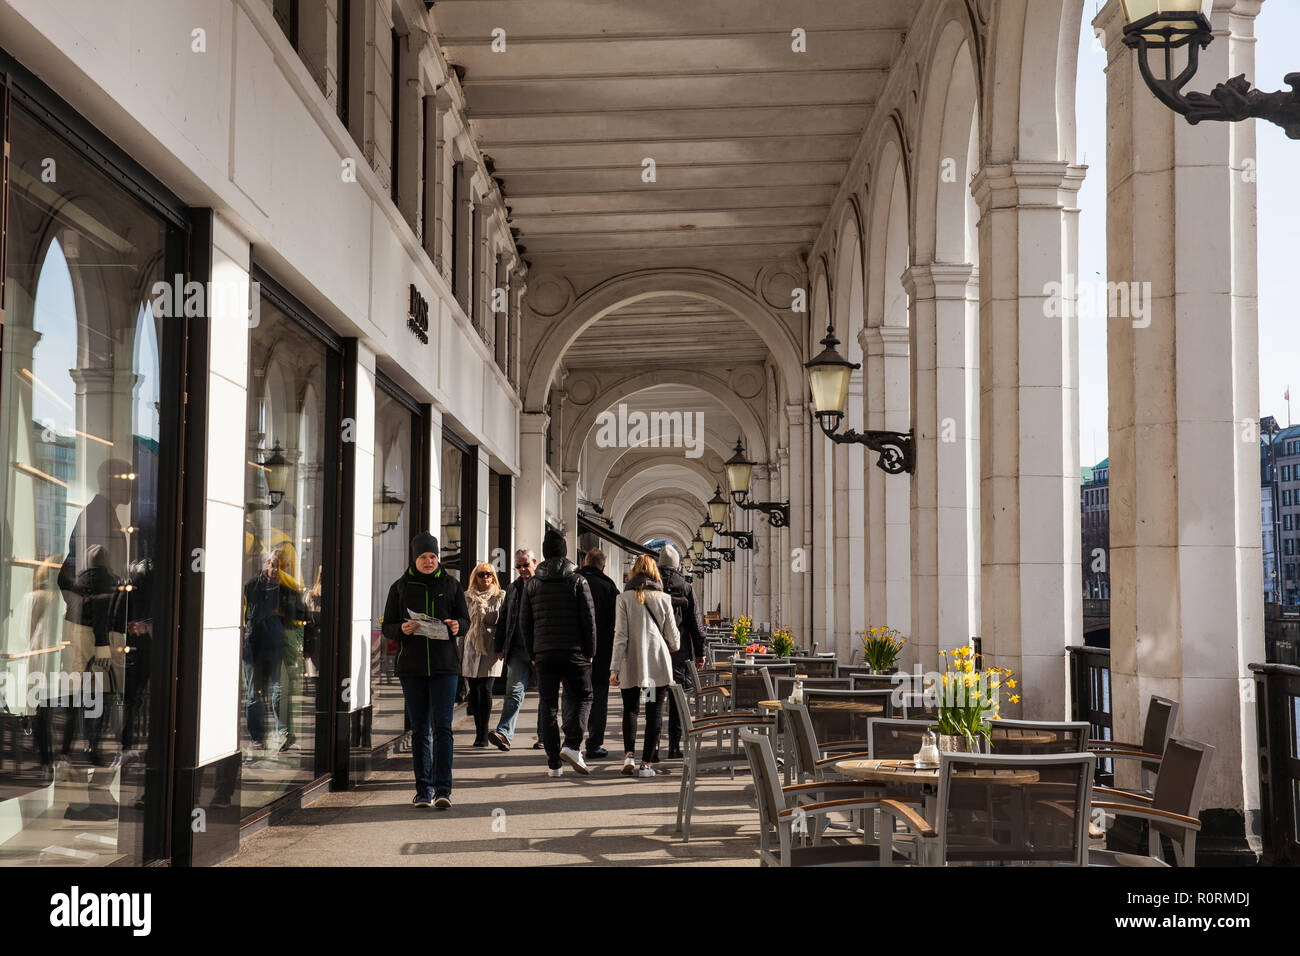 People walking at the beautiful commercial galery Alster Arkaden in a cold early spring Stock Photo